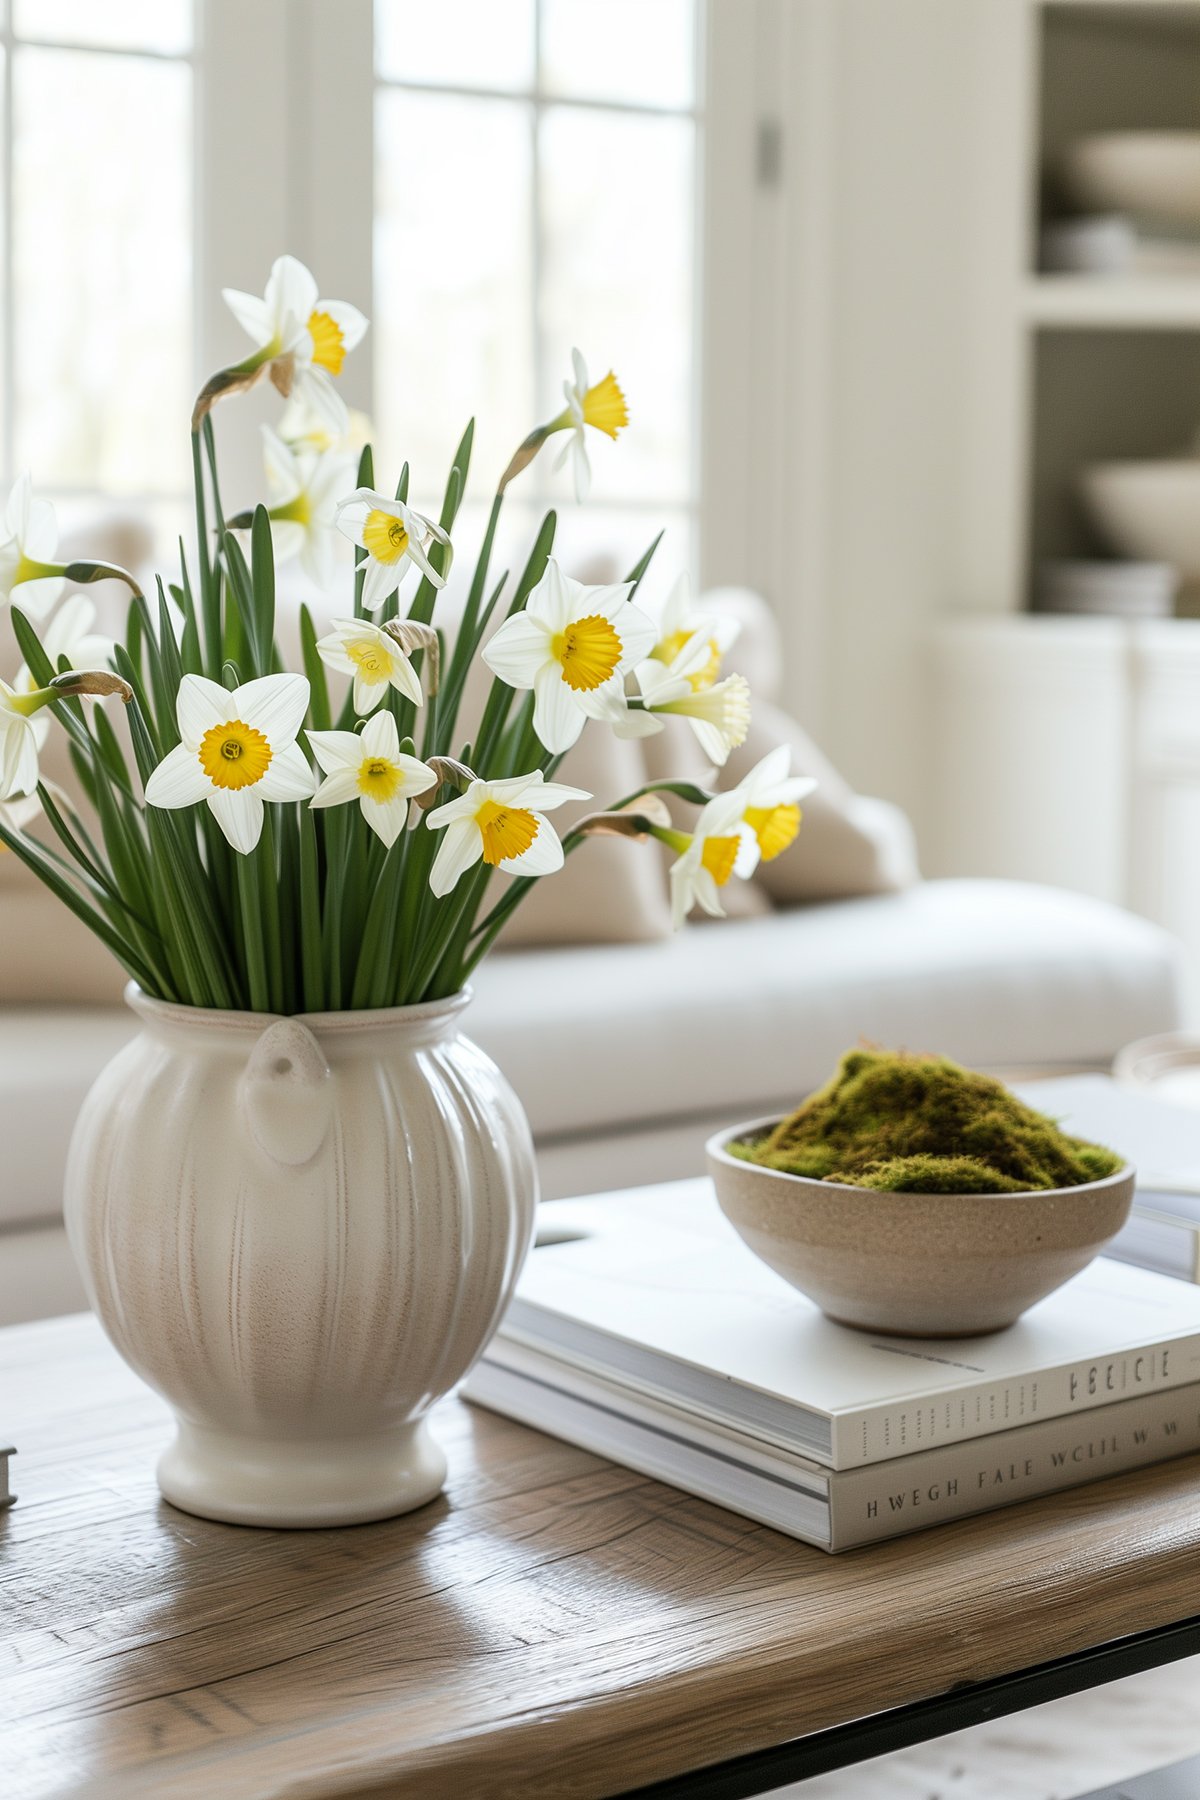 7 Simple Spring Decorating Ideas For Your Home